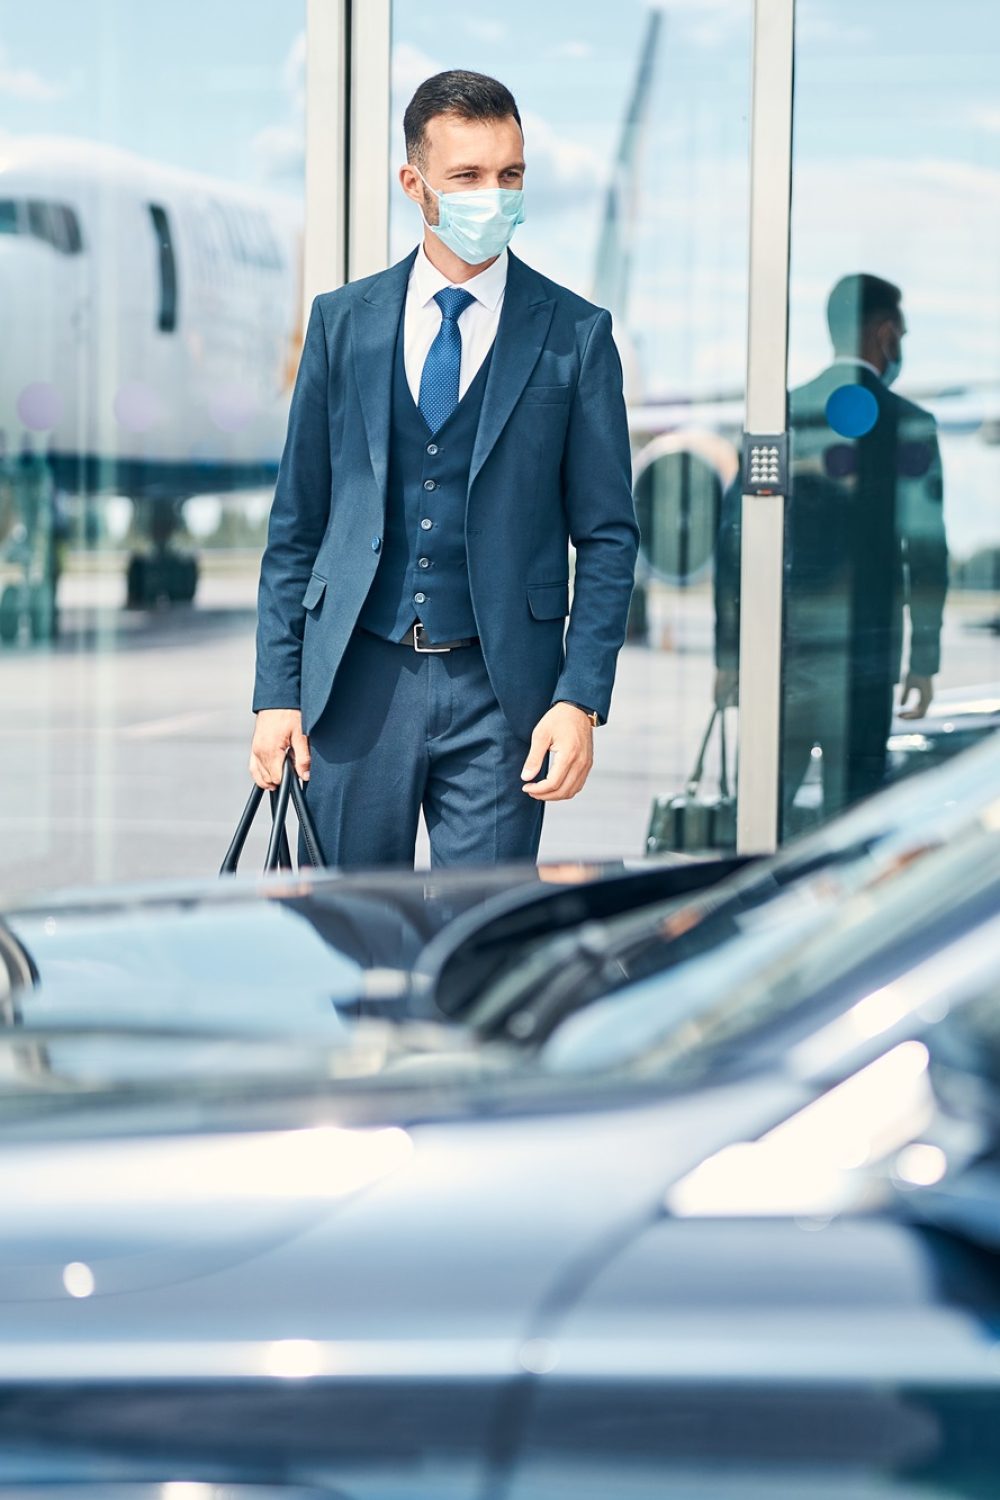 Businessman with a bag in hand standing near the glass door of an airport and looking at the car in front of him. Medical mask on his face